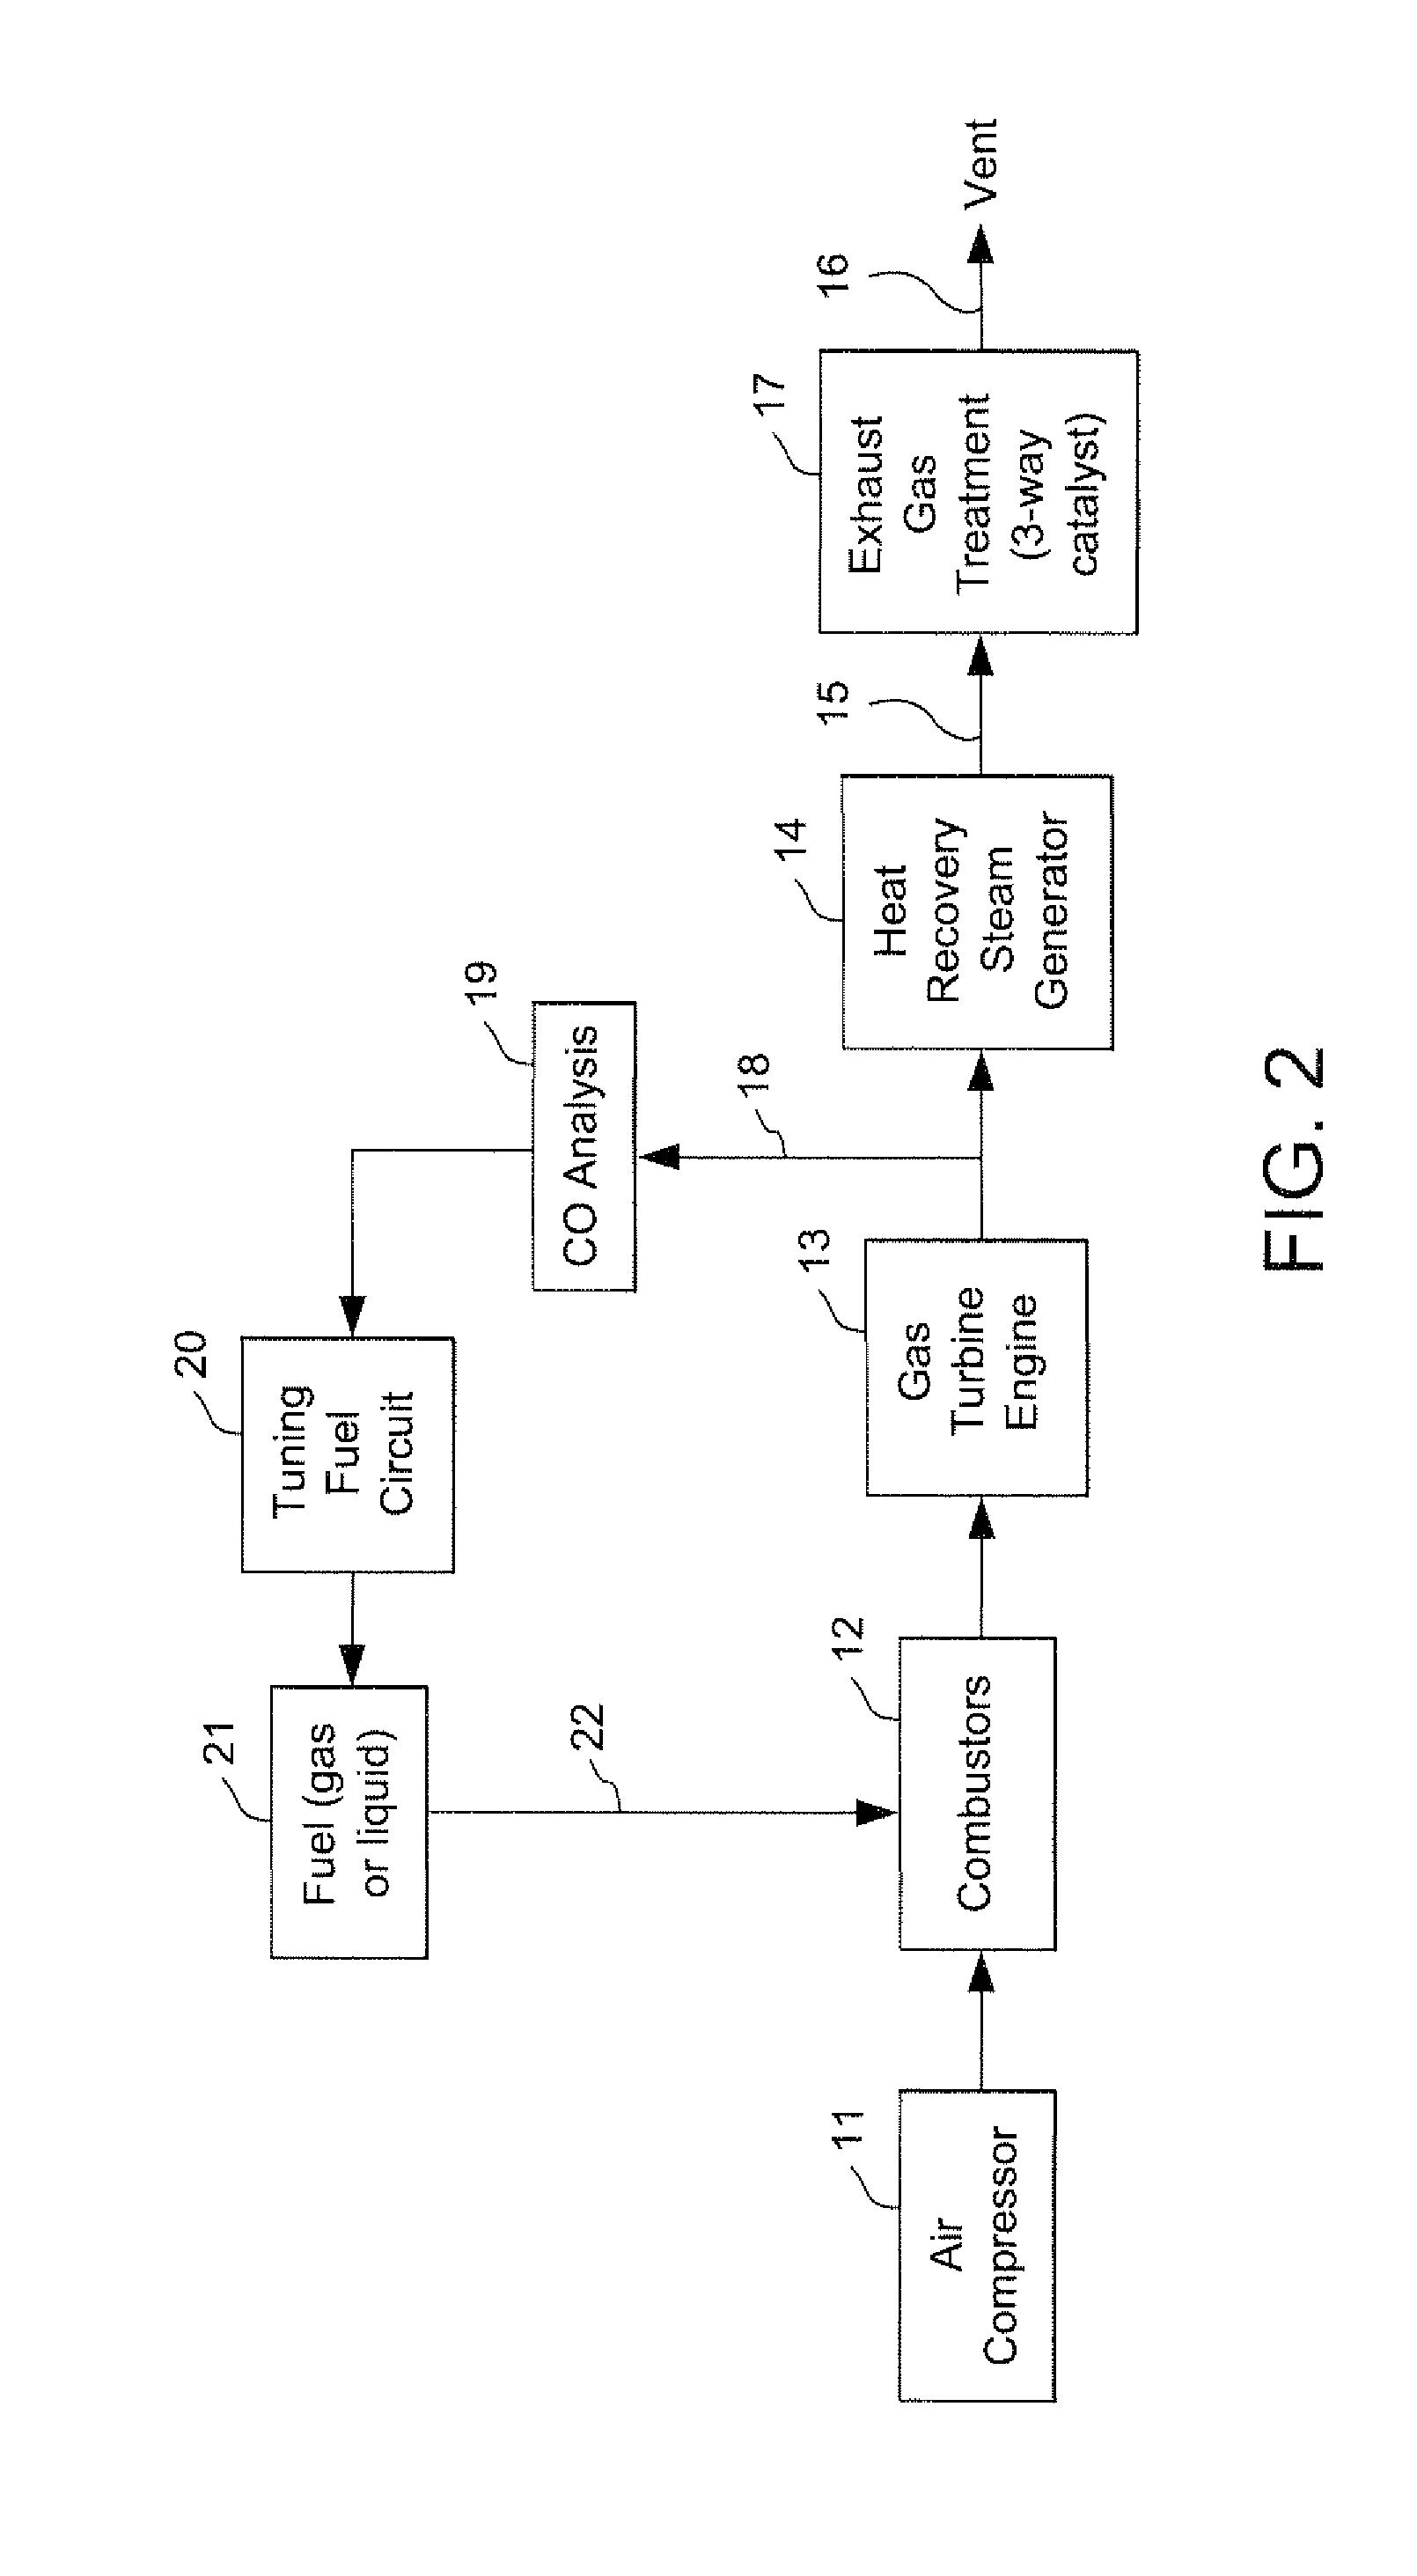 Stoichiometric exhaust gas recirculation and related combustion control